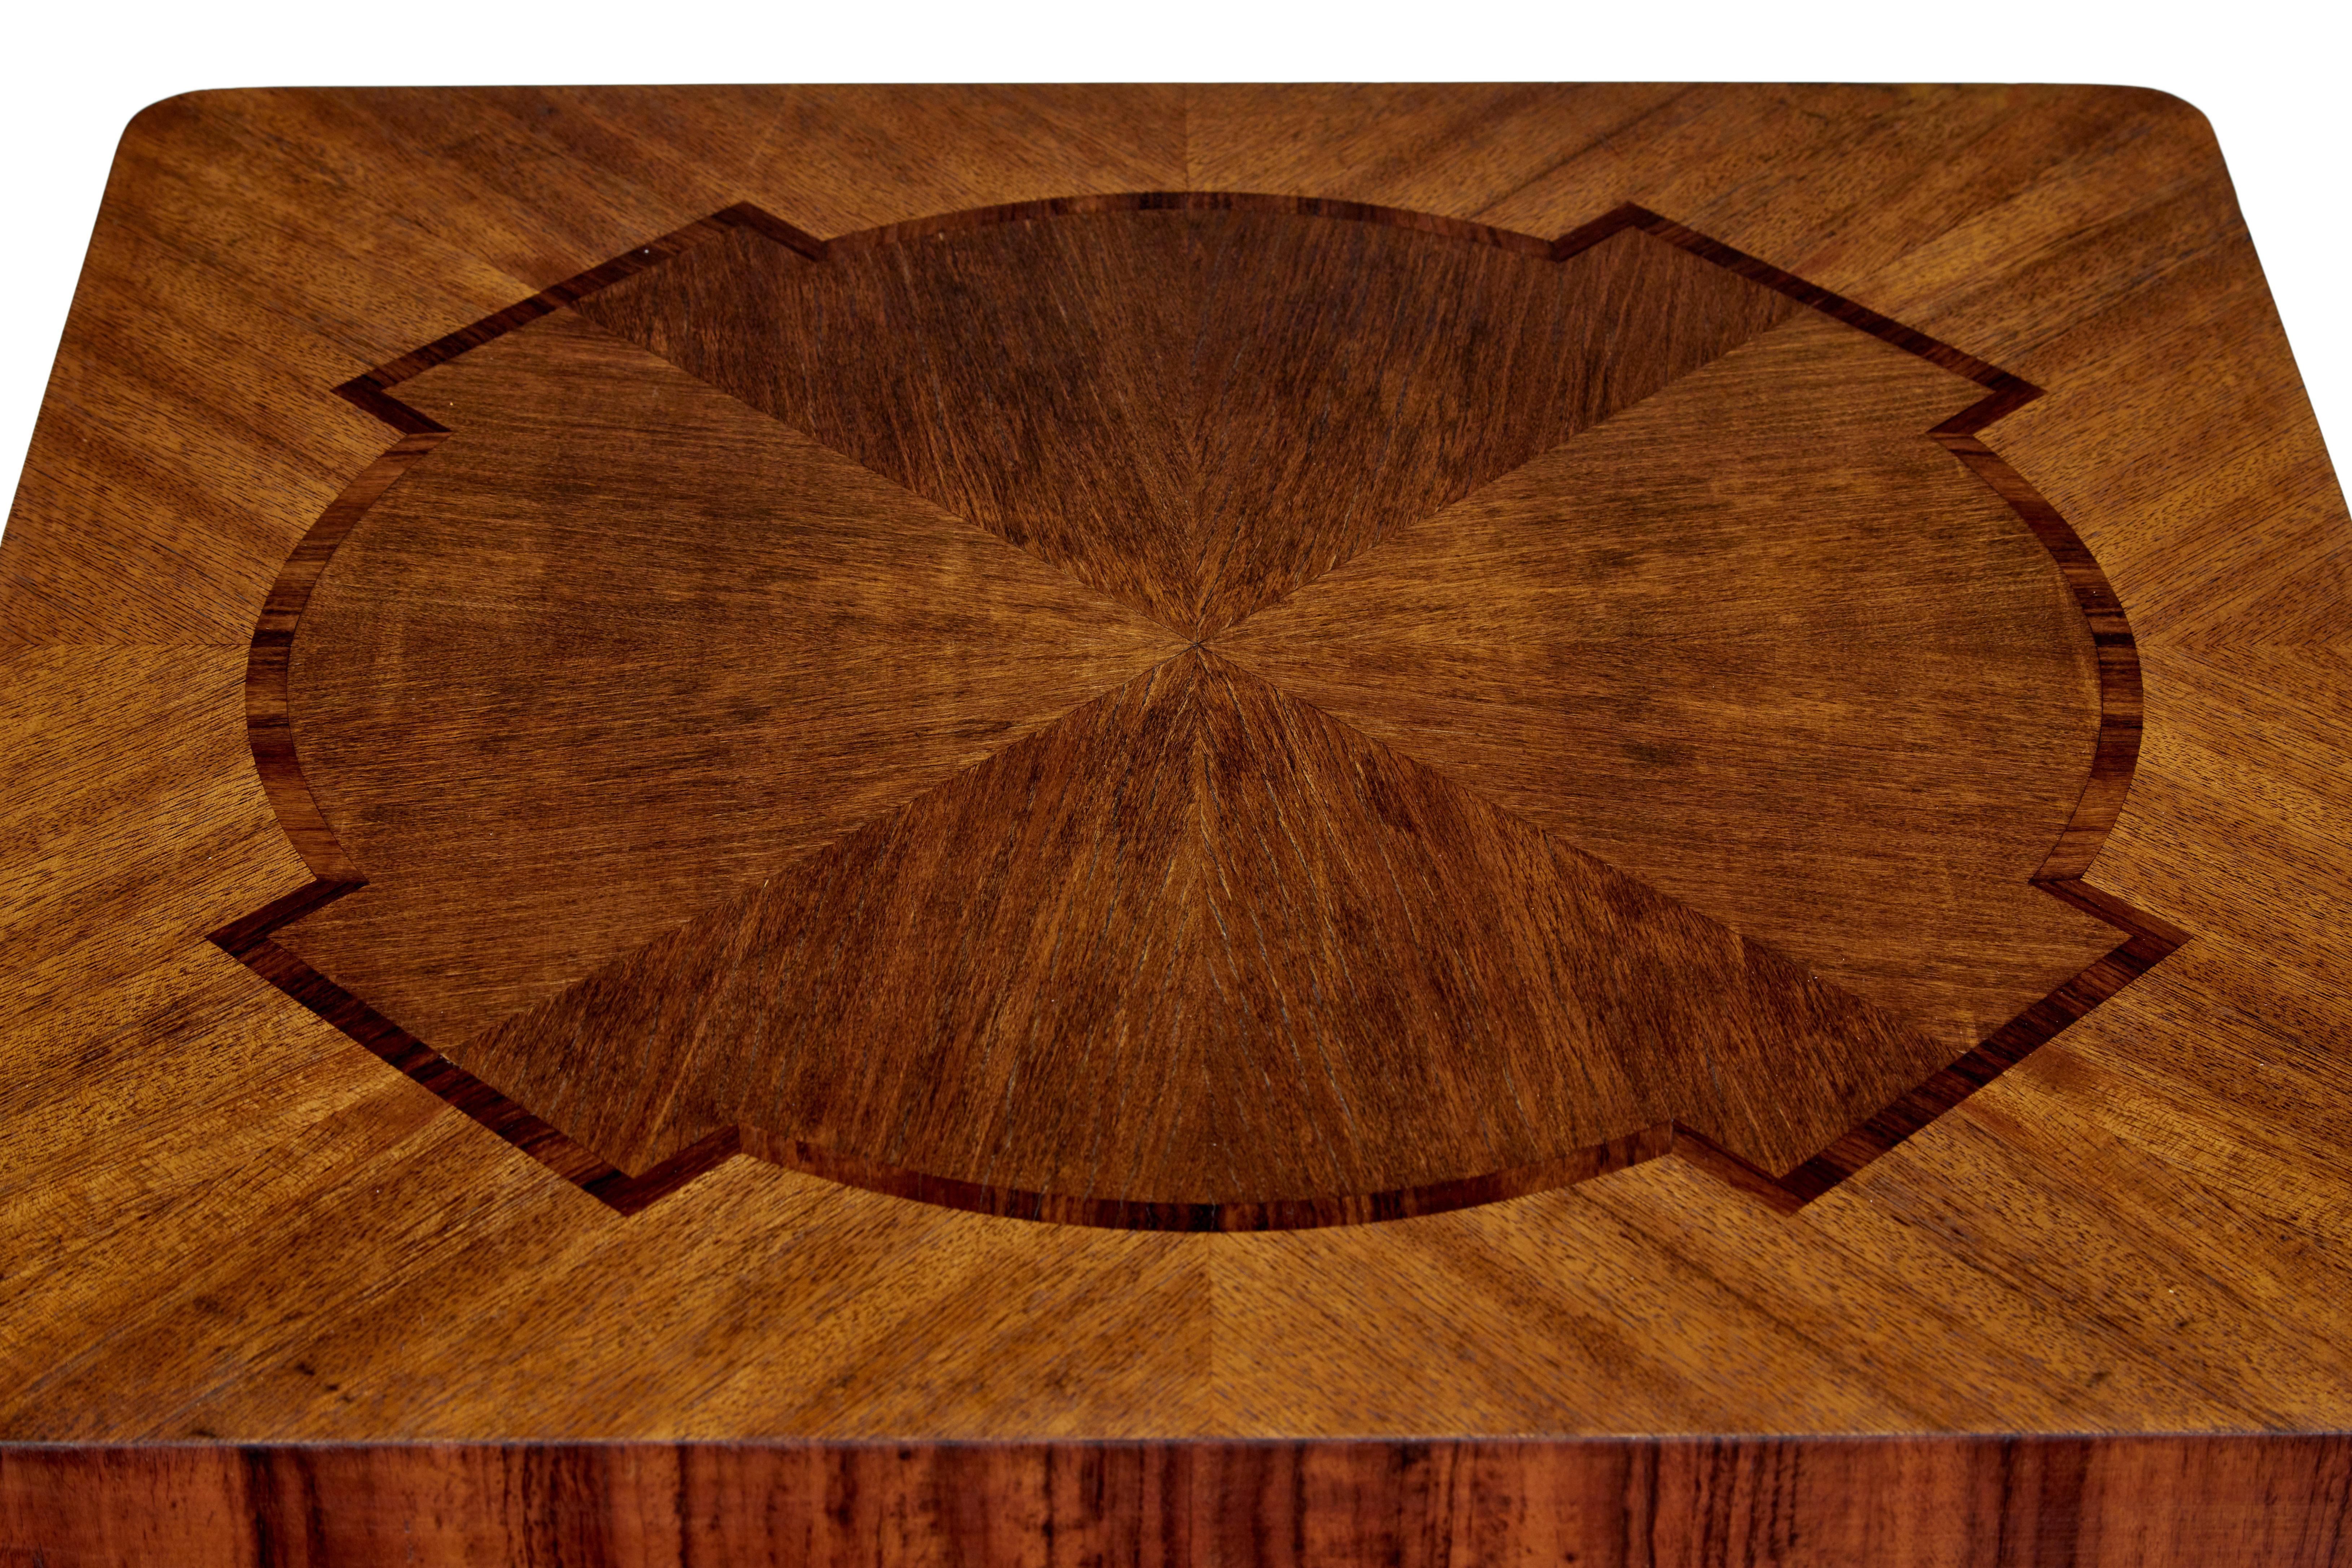 Mid 20th century walnut and birch inlaid coffee table In Good Condition For Sale In Debenham, Suffolk